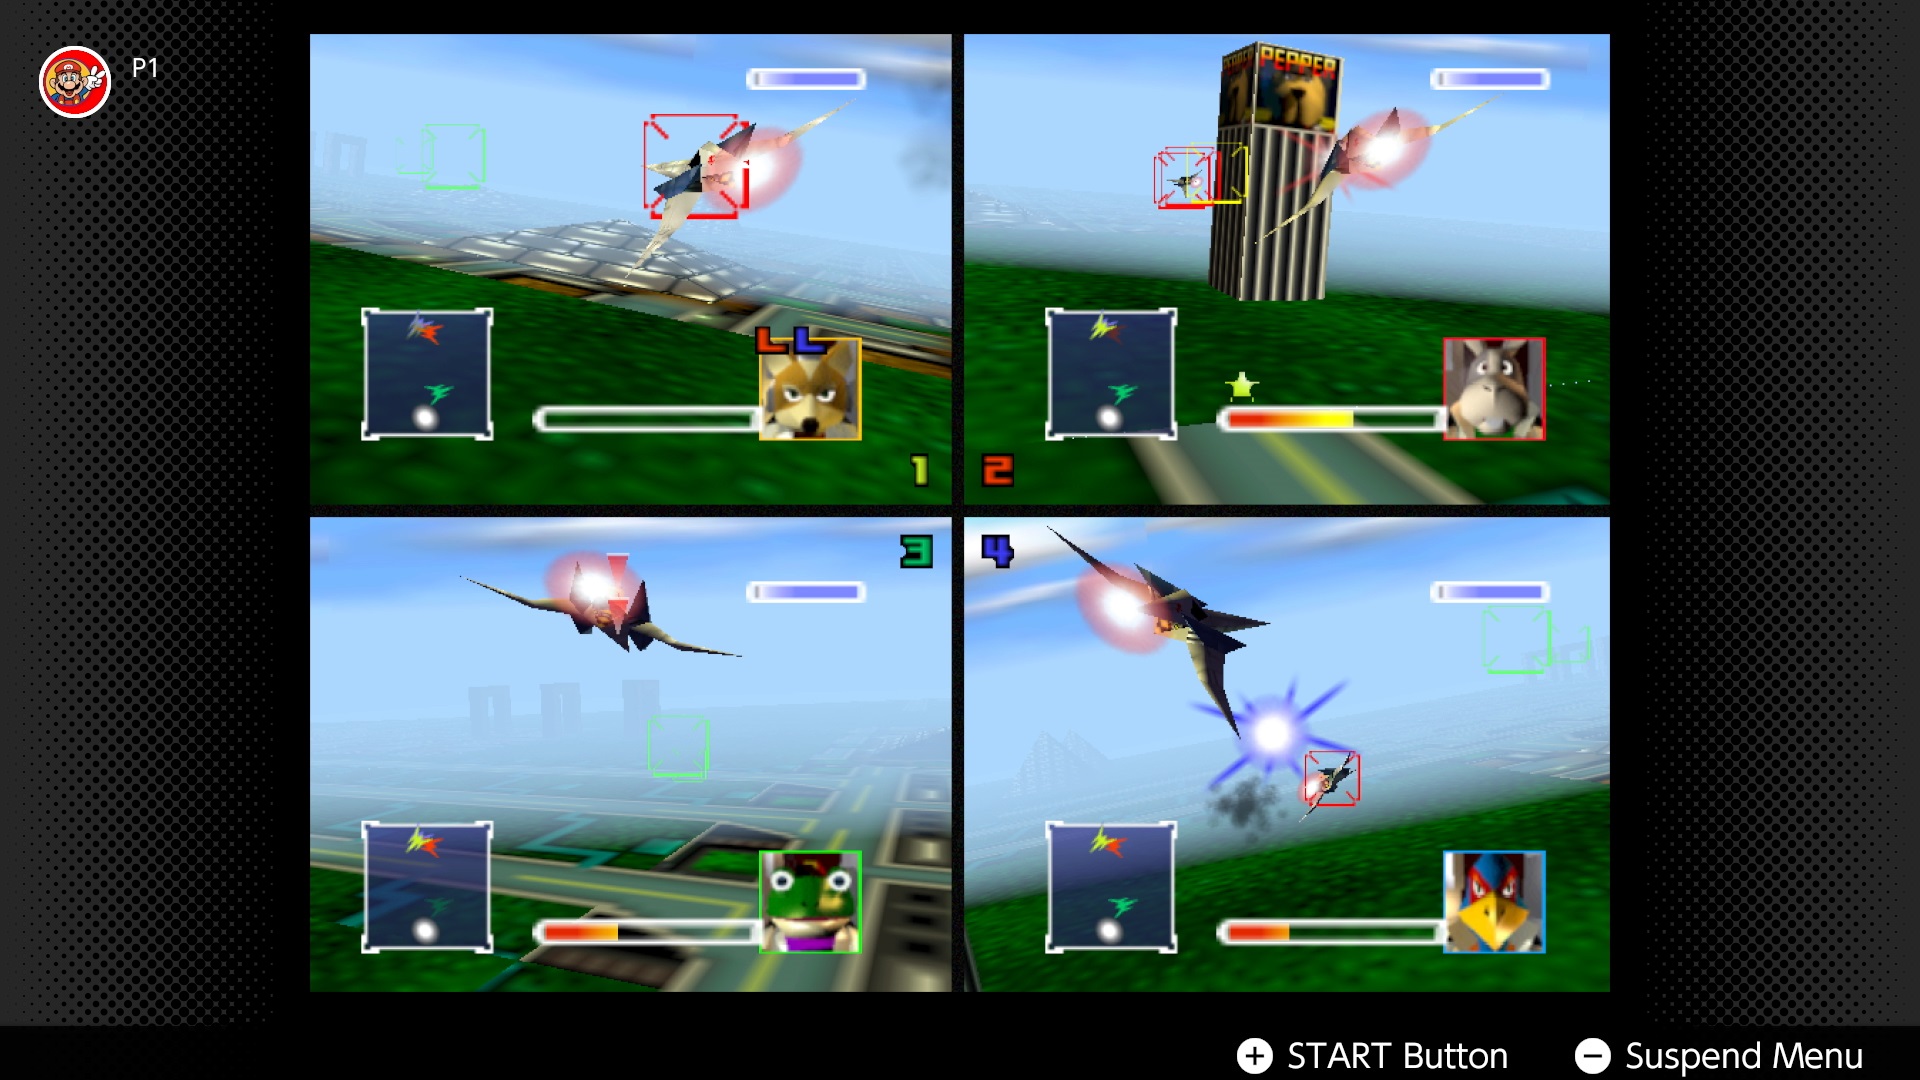 Star Fox 64 multiplayer with Nintendo Switch Online